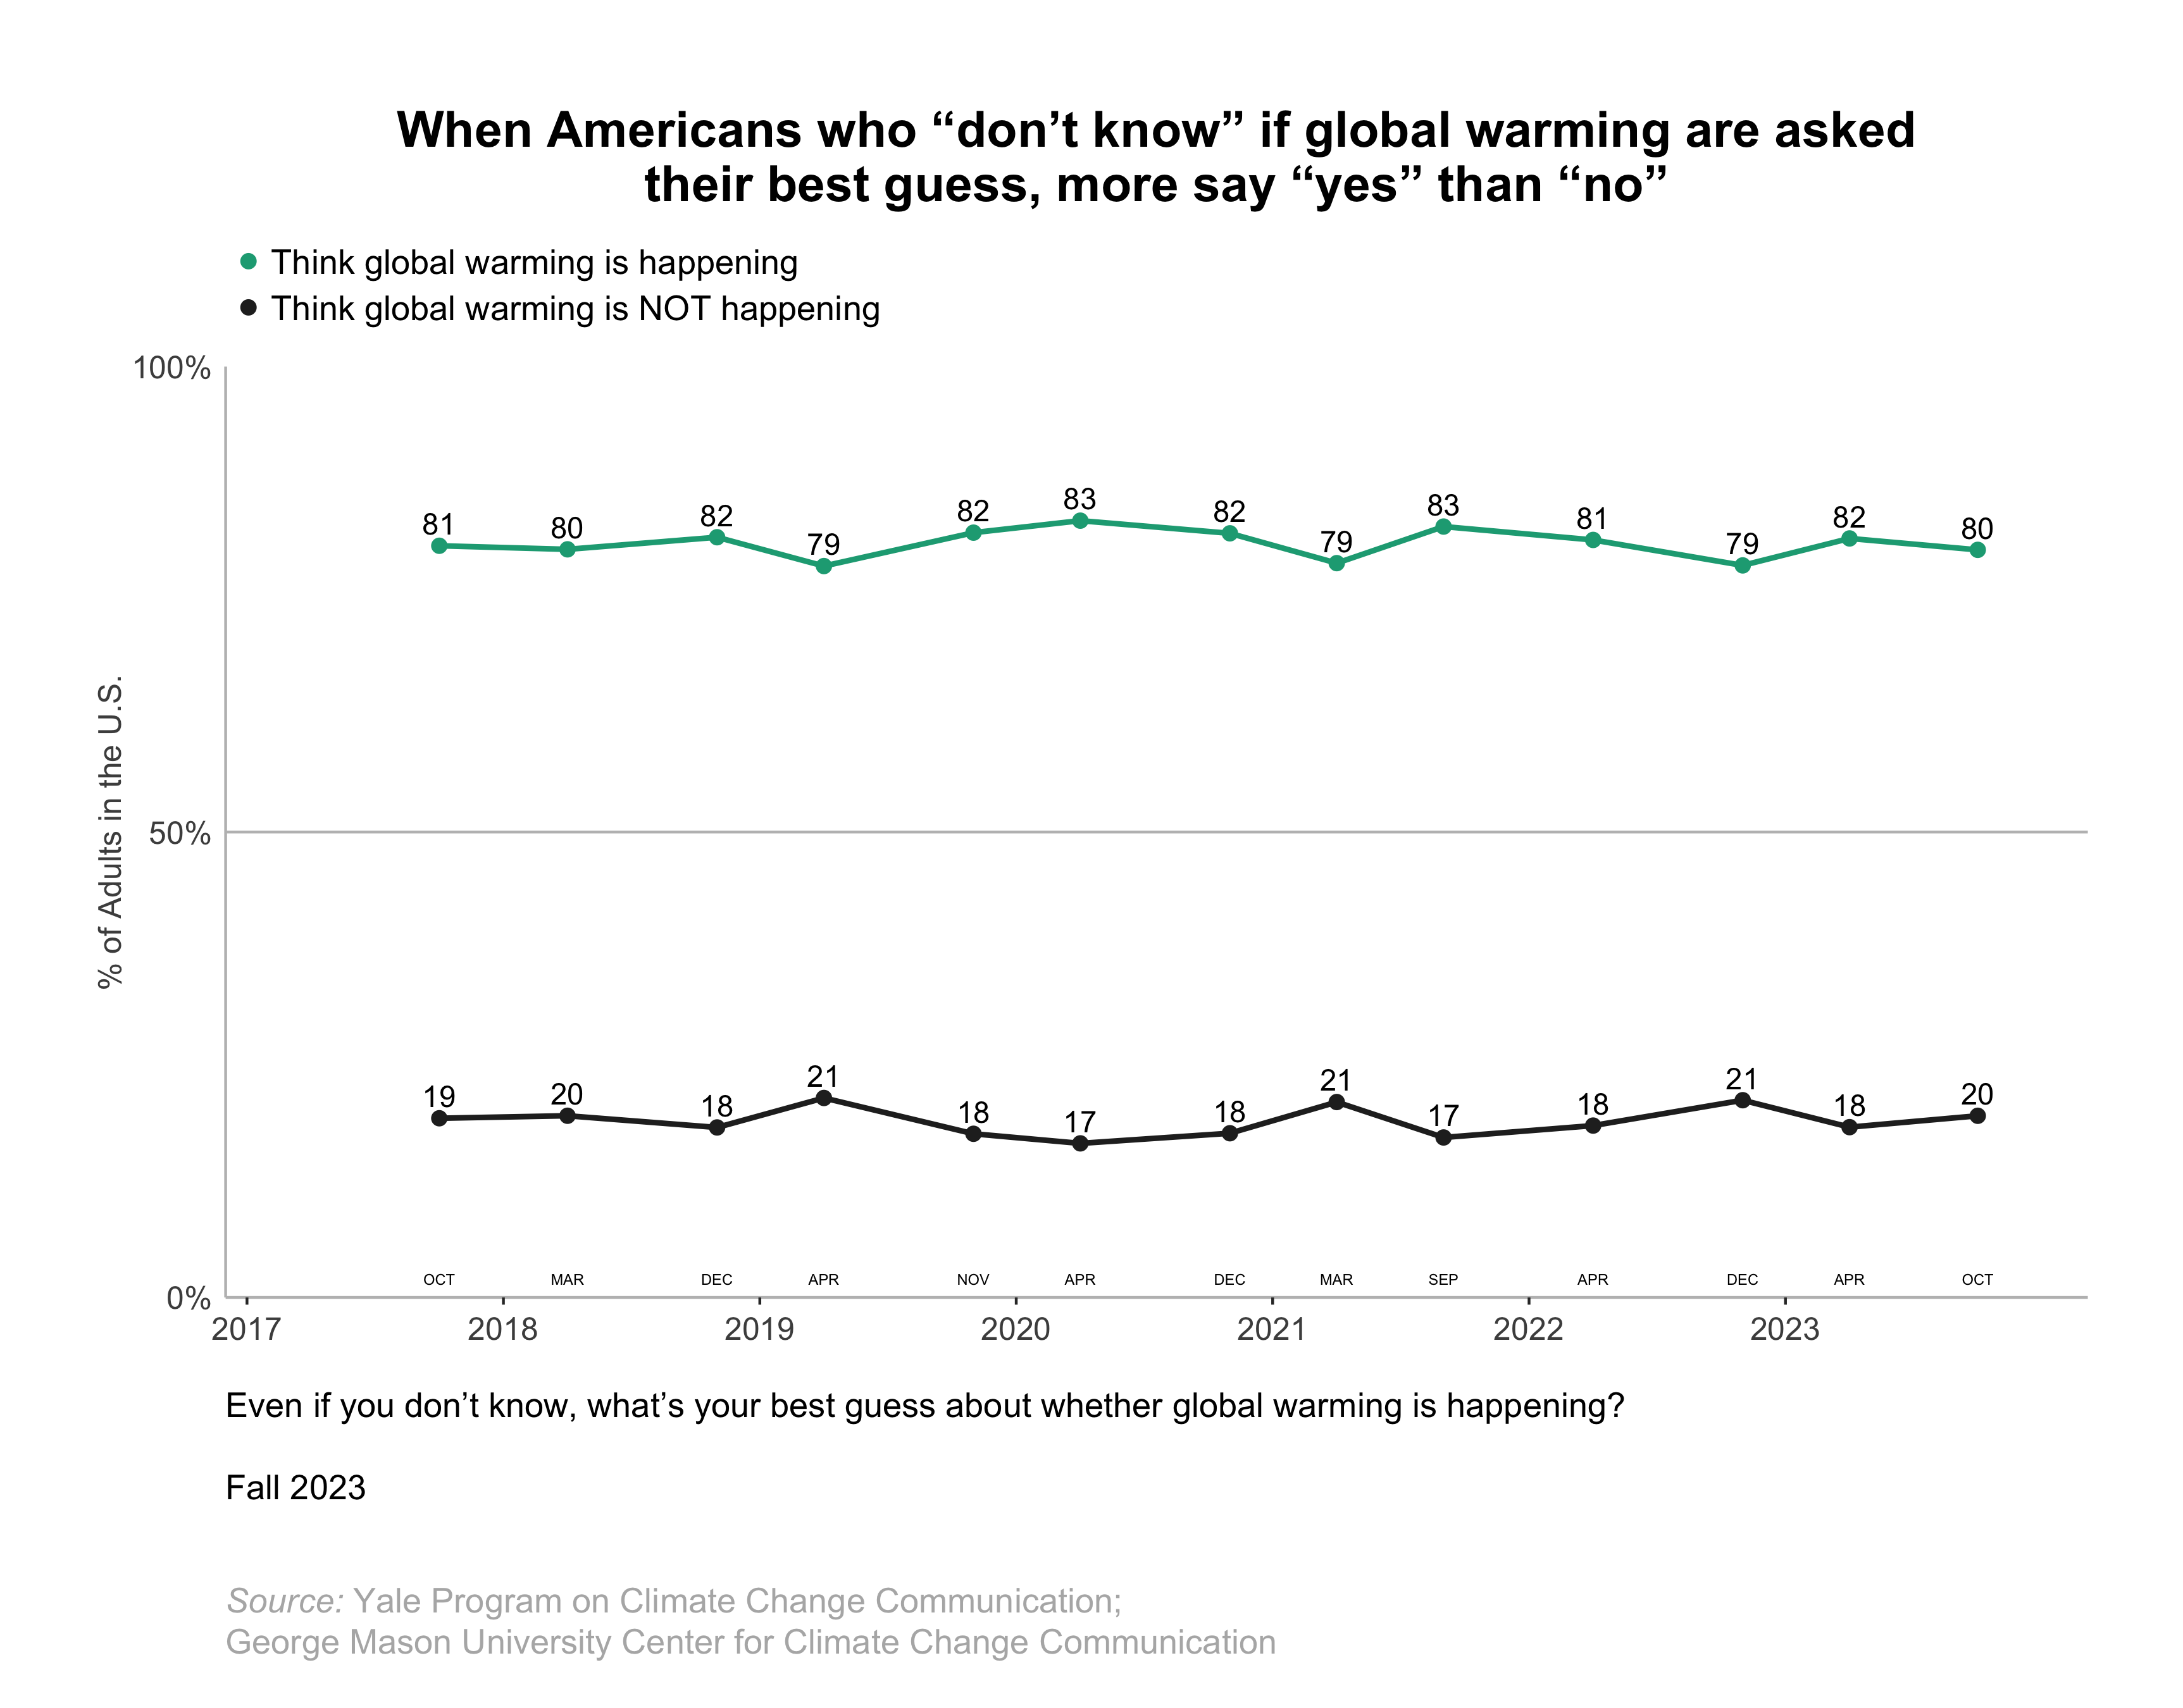 This line graph shows the percentage of Americans over time since 2017 who think global warming is happening or not happening, including those who initially say they "don’t know," but then provide their best guess. When Americans who “don’t know” if global warming are asked their best guess, more say “yes” than “no”. Data: Climate Change in the American Mind, Fall 2023. Refer to the data tables in Appendix 1 of the report for all percentages.